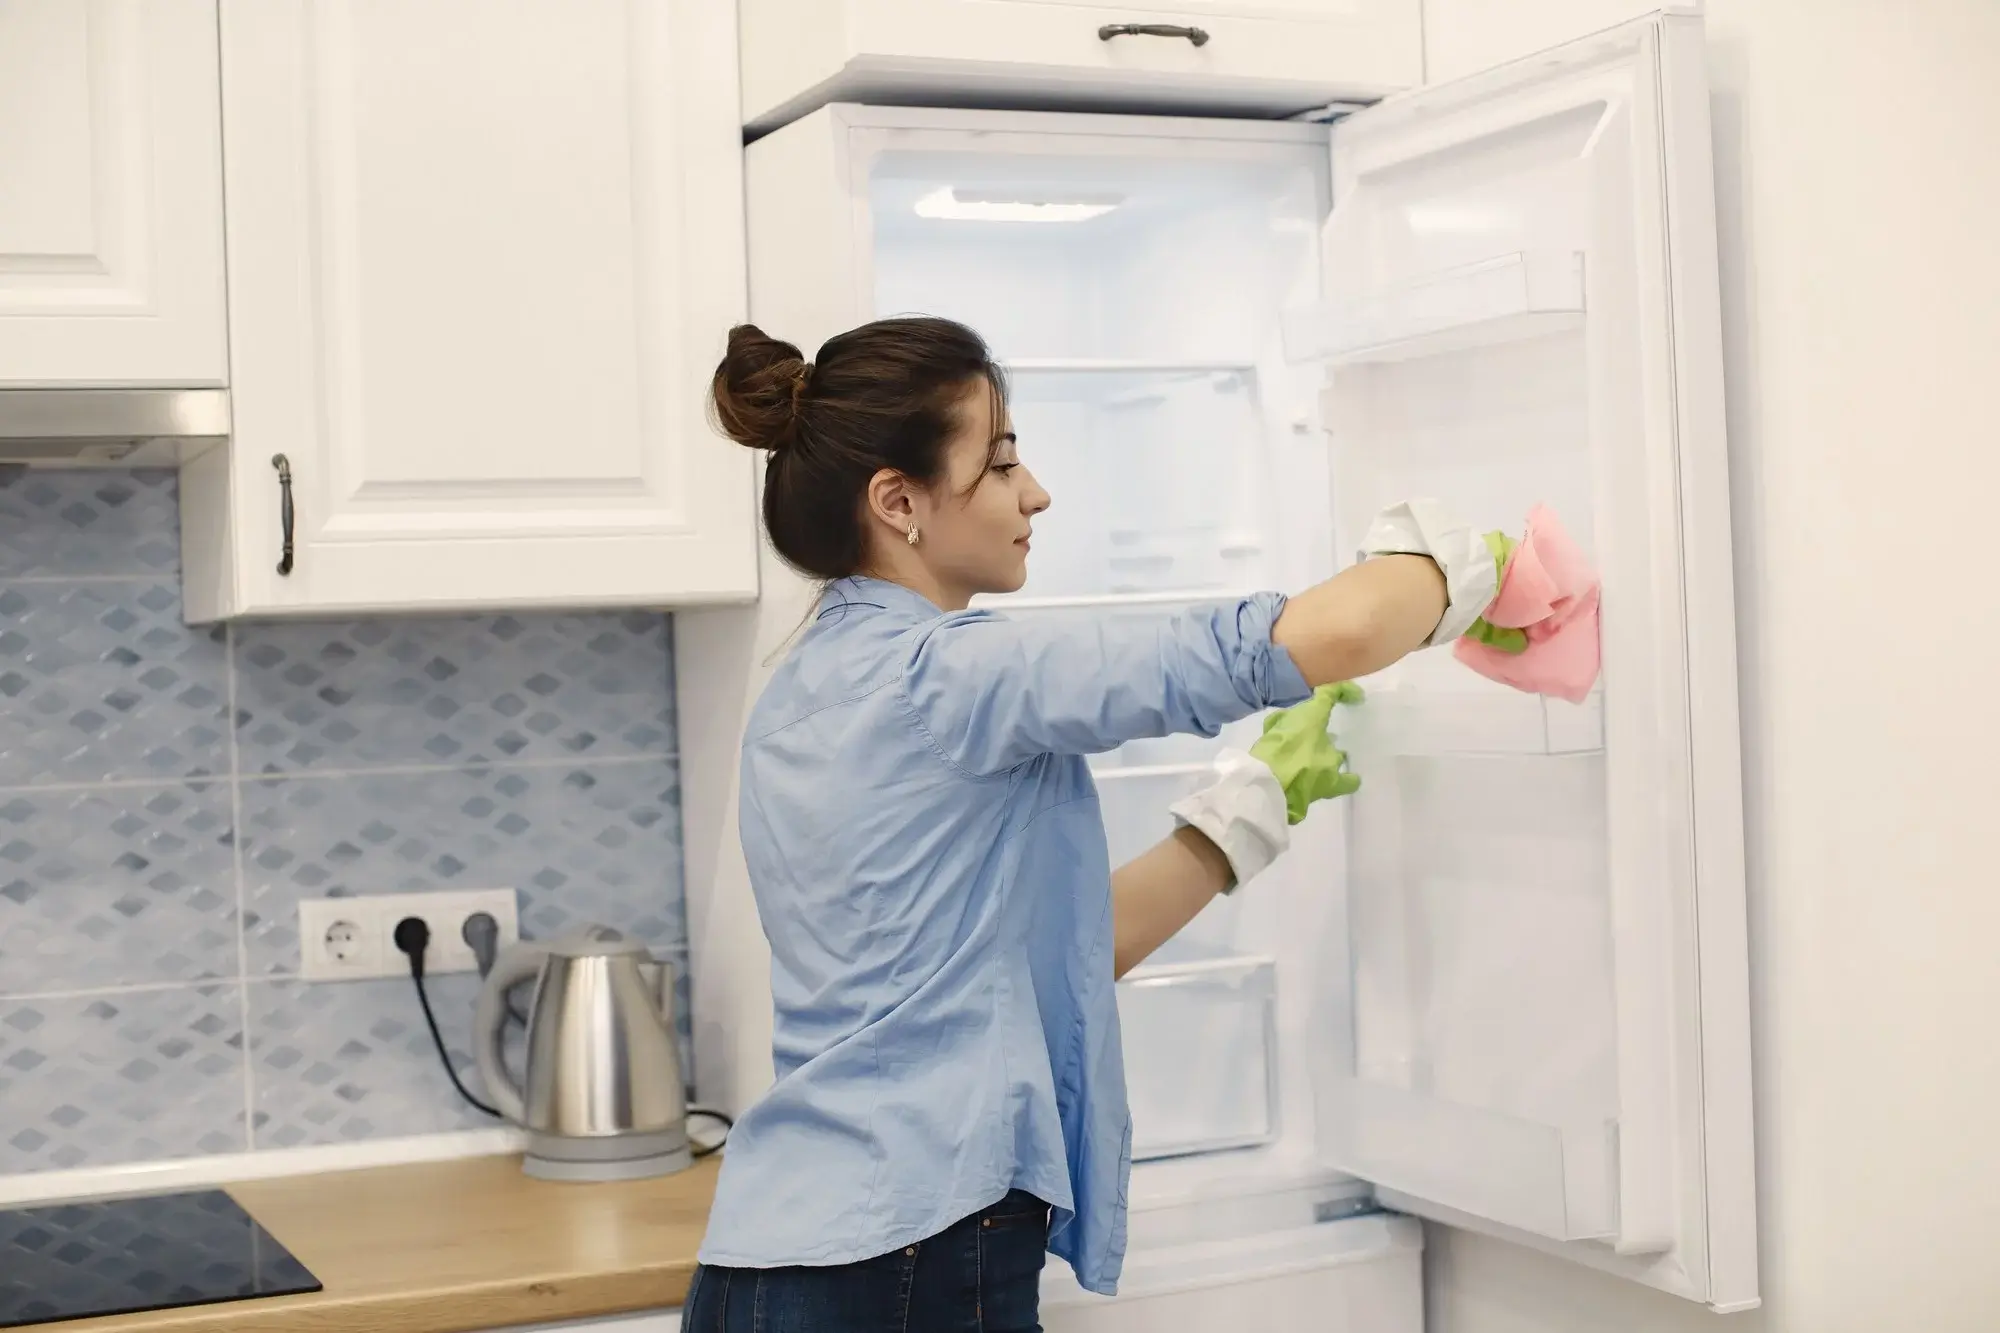 A Complete Guide: How to Clean Your Refrigerator